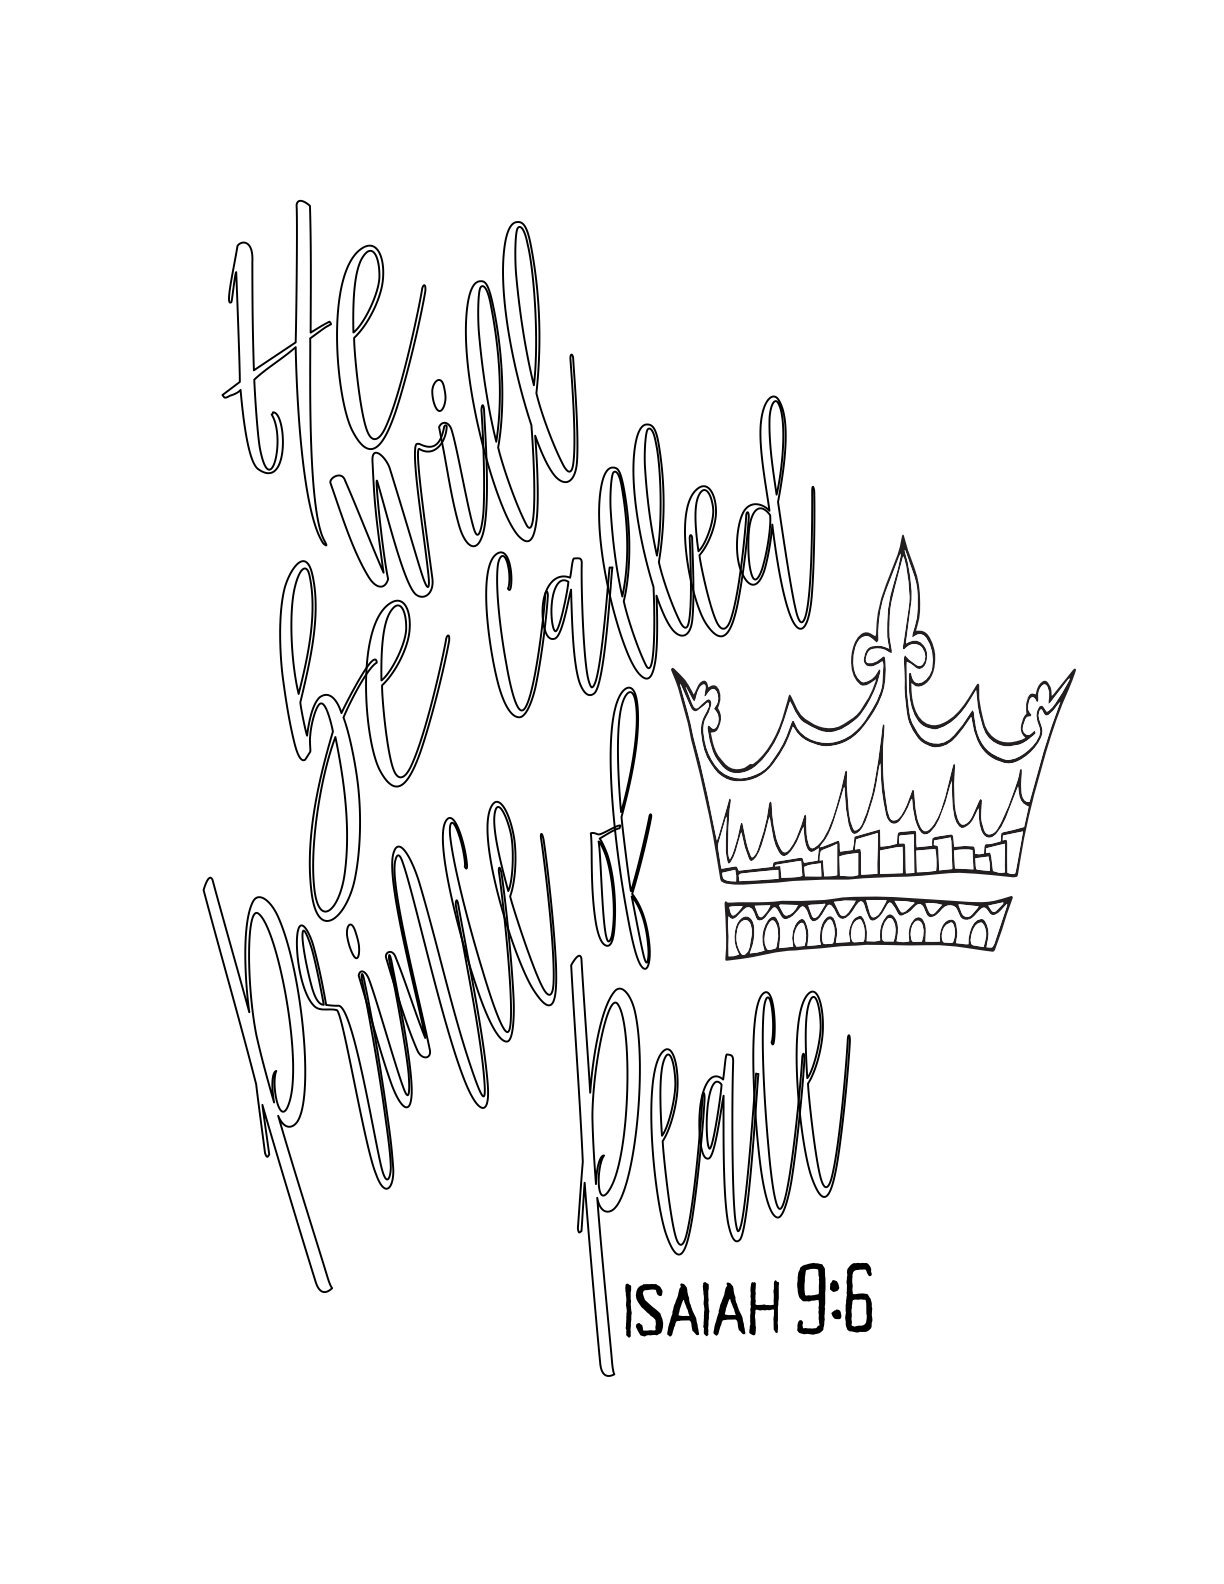 Free Advent Coloring Page - Prince of Peace - Isaiah 9:6 - Simple Christmas Coloring PrintableCLICK HERE TO DOWNLOAD YOUR FREE PRINCE OF PEACE CHRISTMAS COLORING PAGE